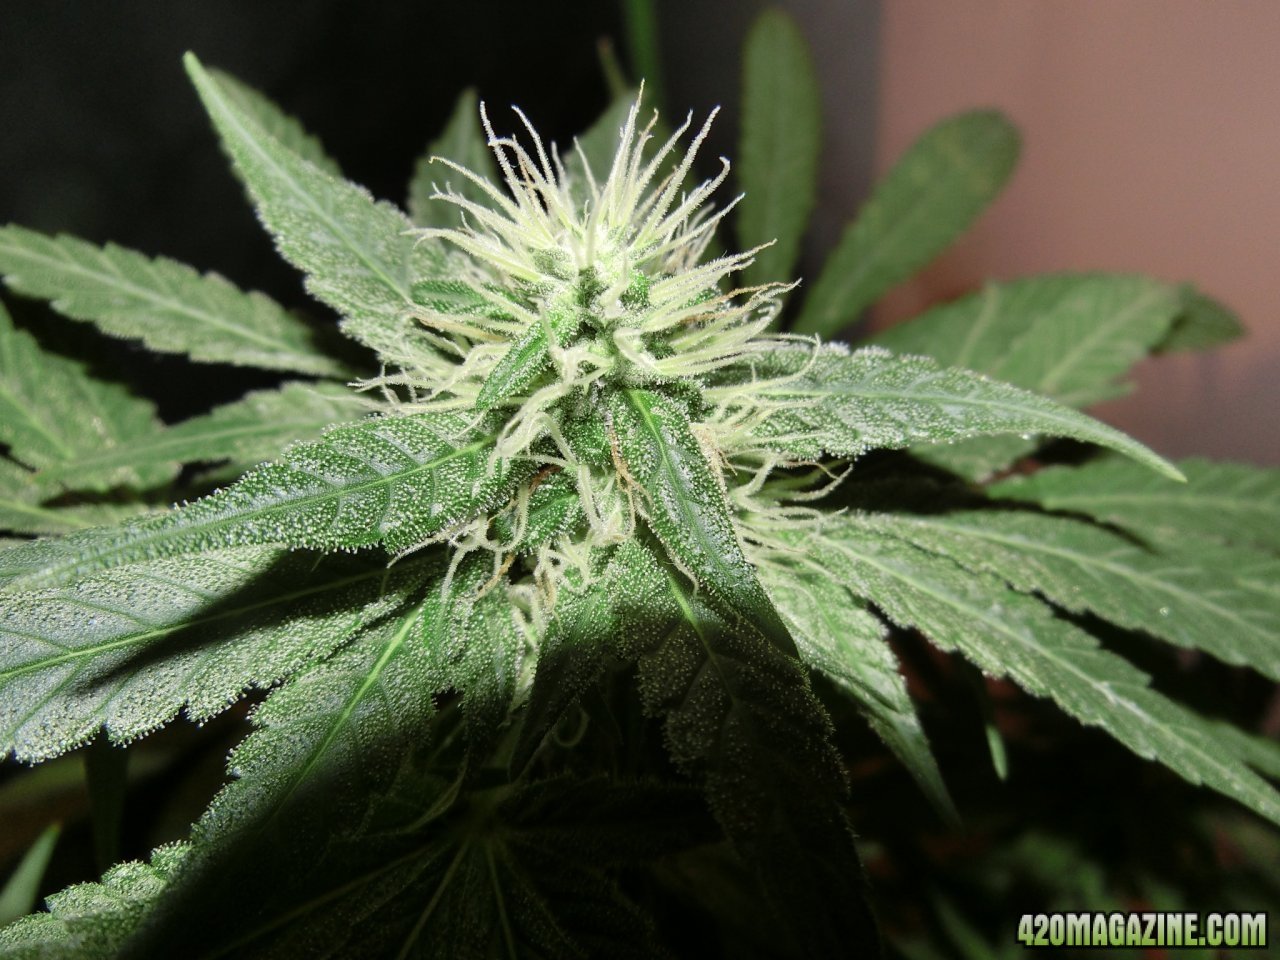 Day 84 Maui Waui Flower Day 36 - Buds are still a little small but it has a long way to go...